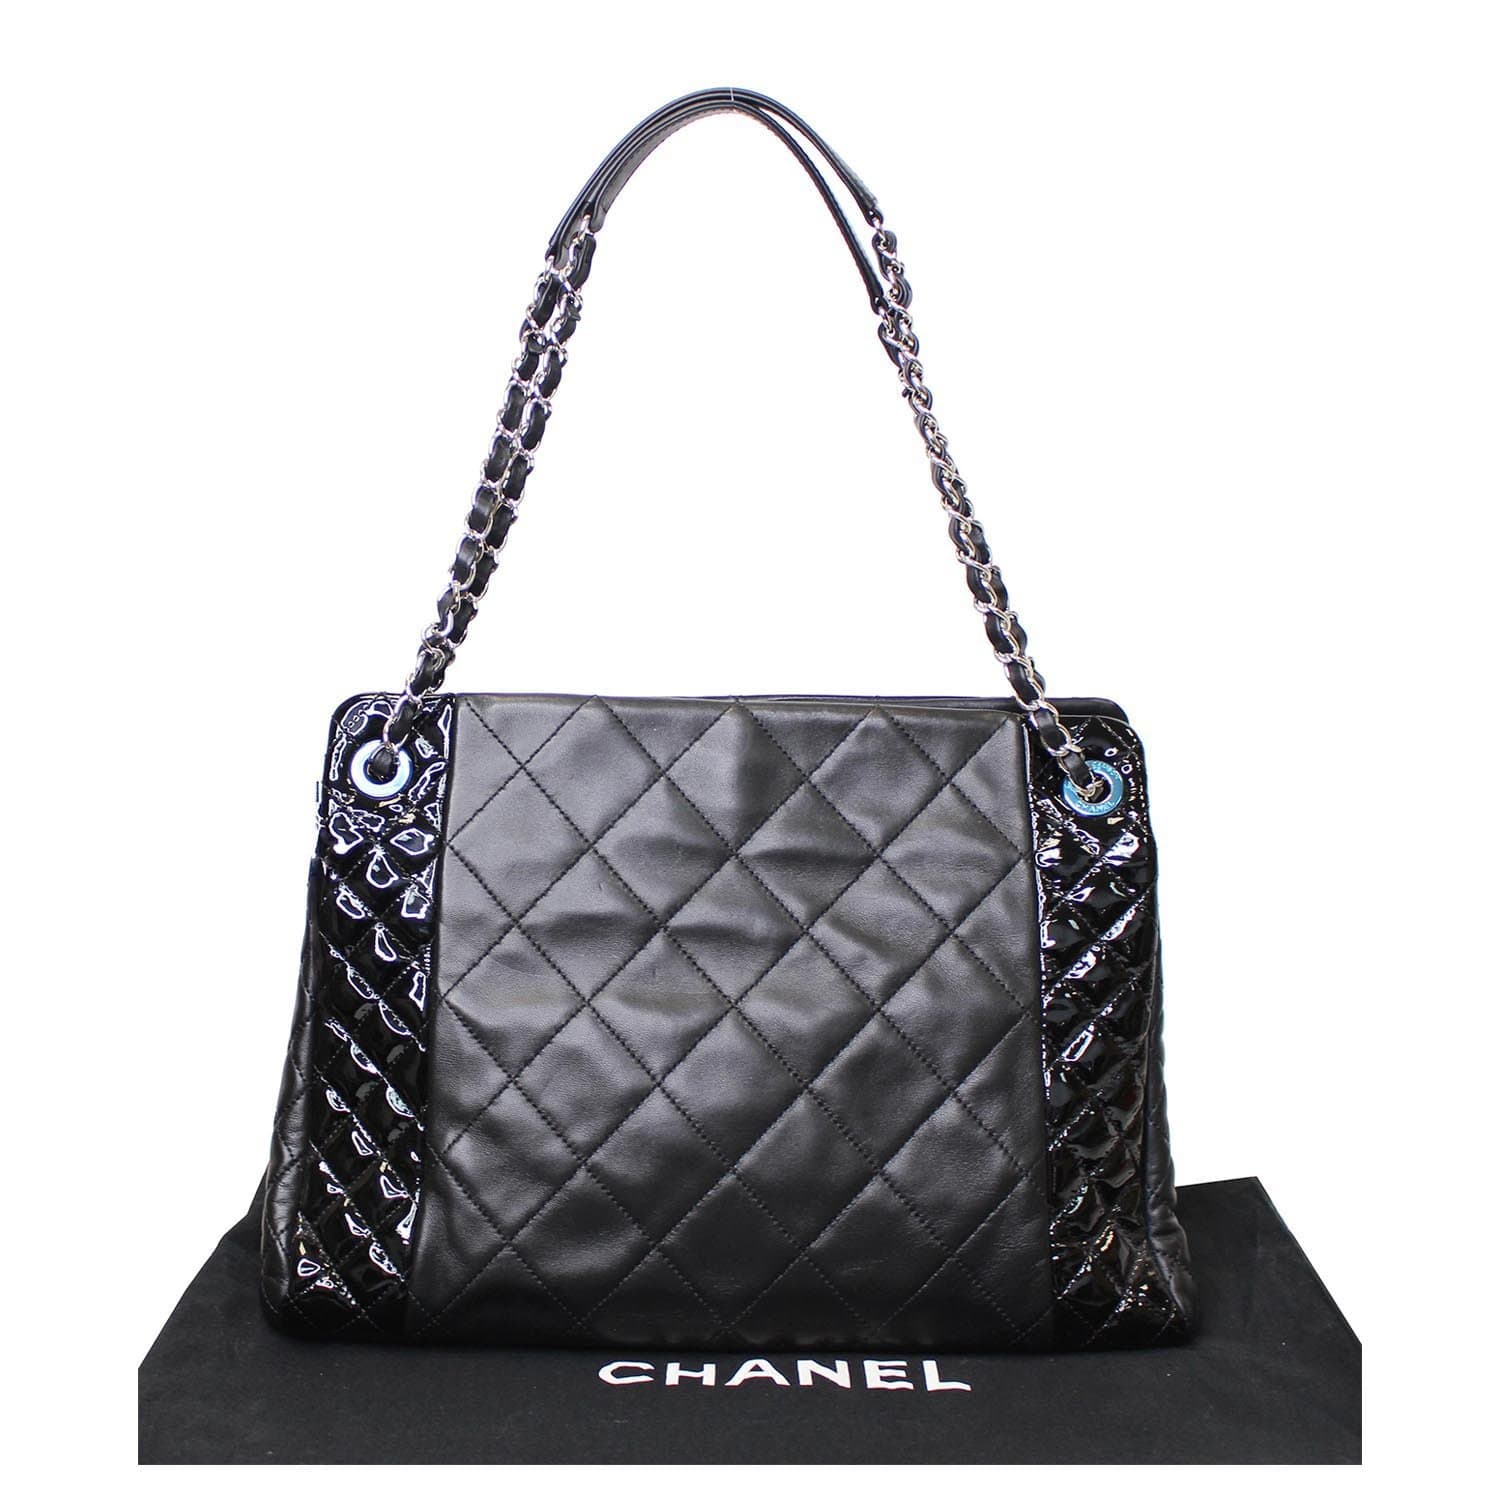 CHANEL Lambskin Quilted Large Fluffy CC Shopping Tote Black 260509